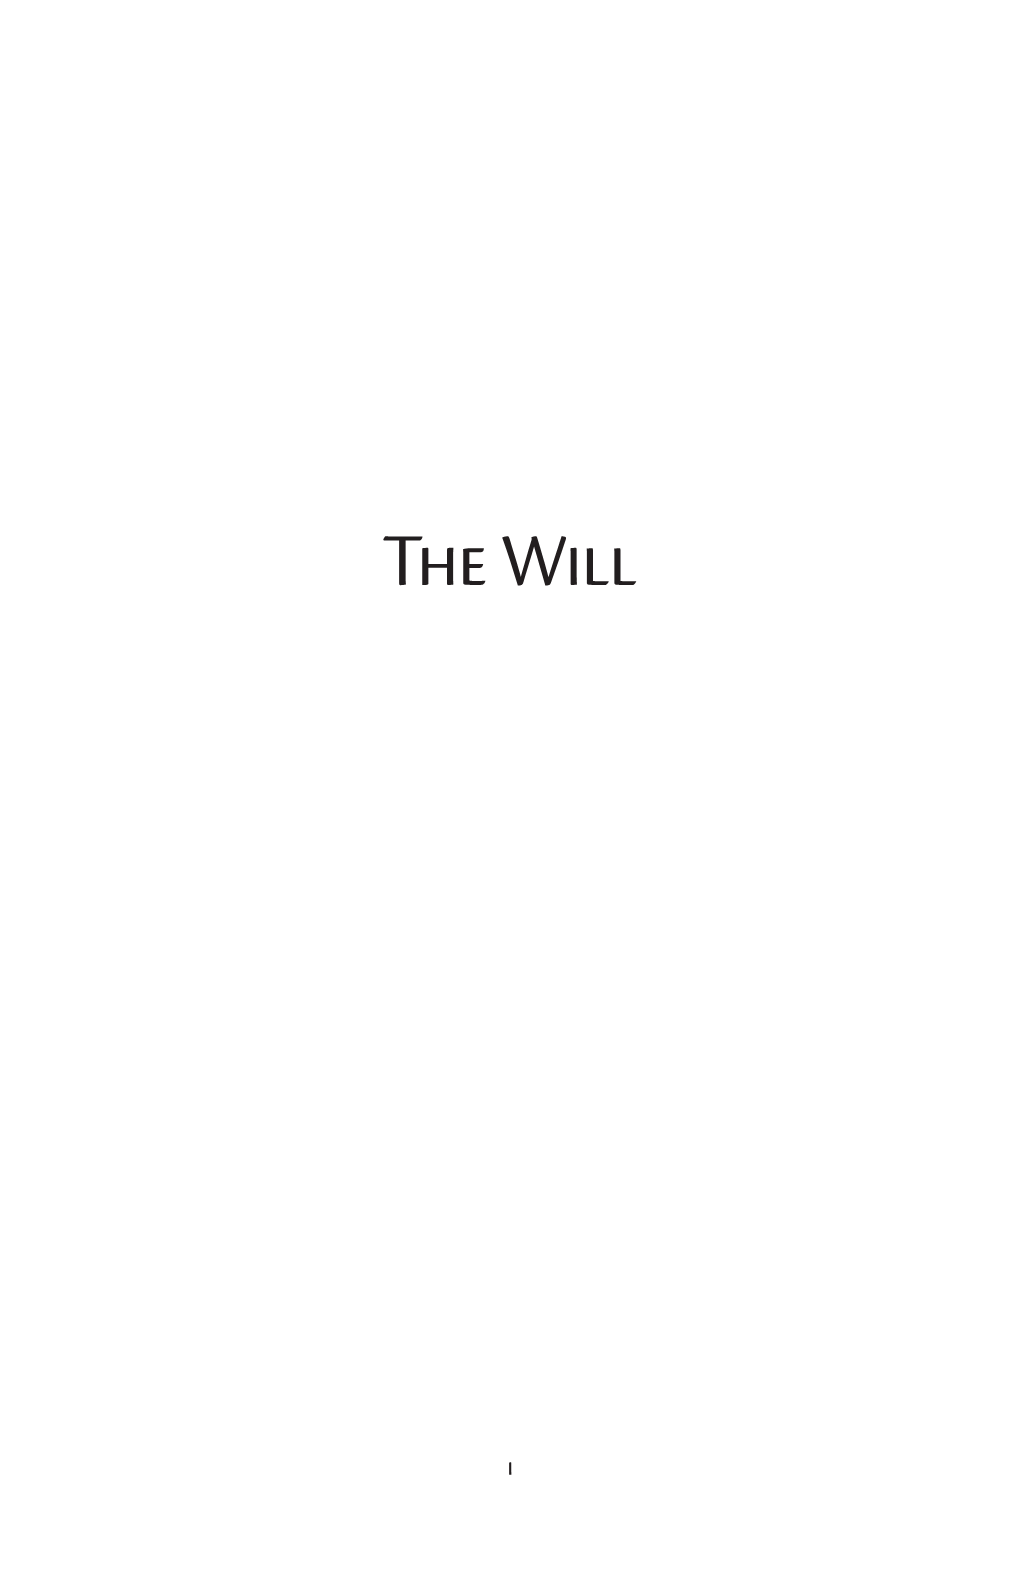 (1909) the Will—Its Nature, Power and Development